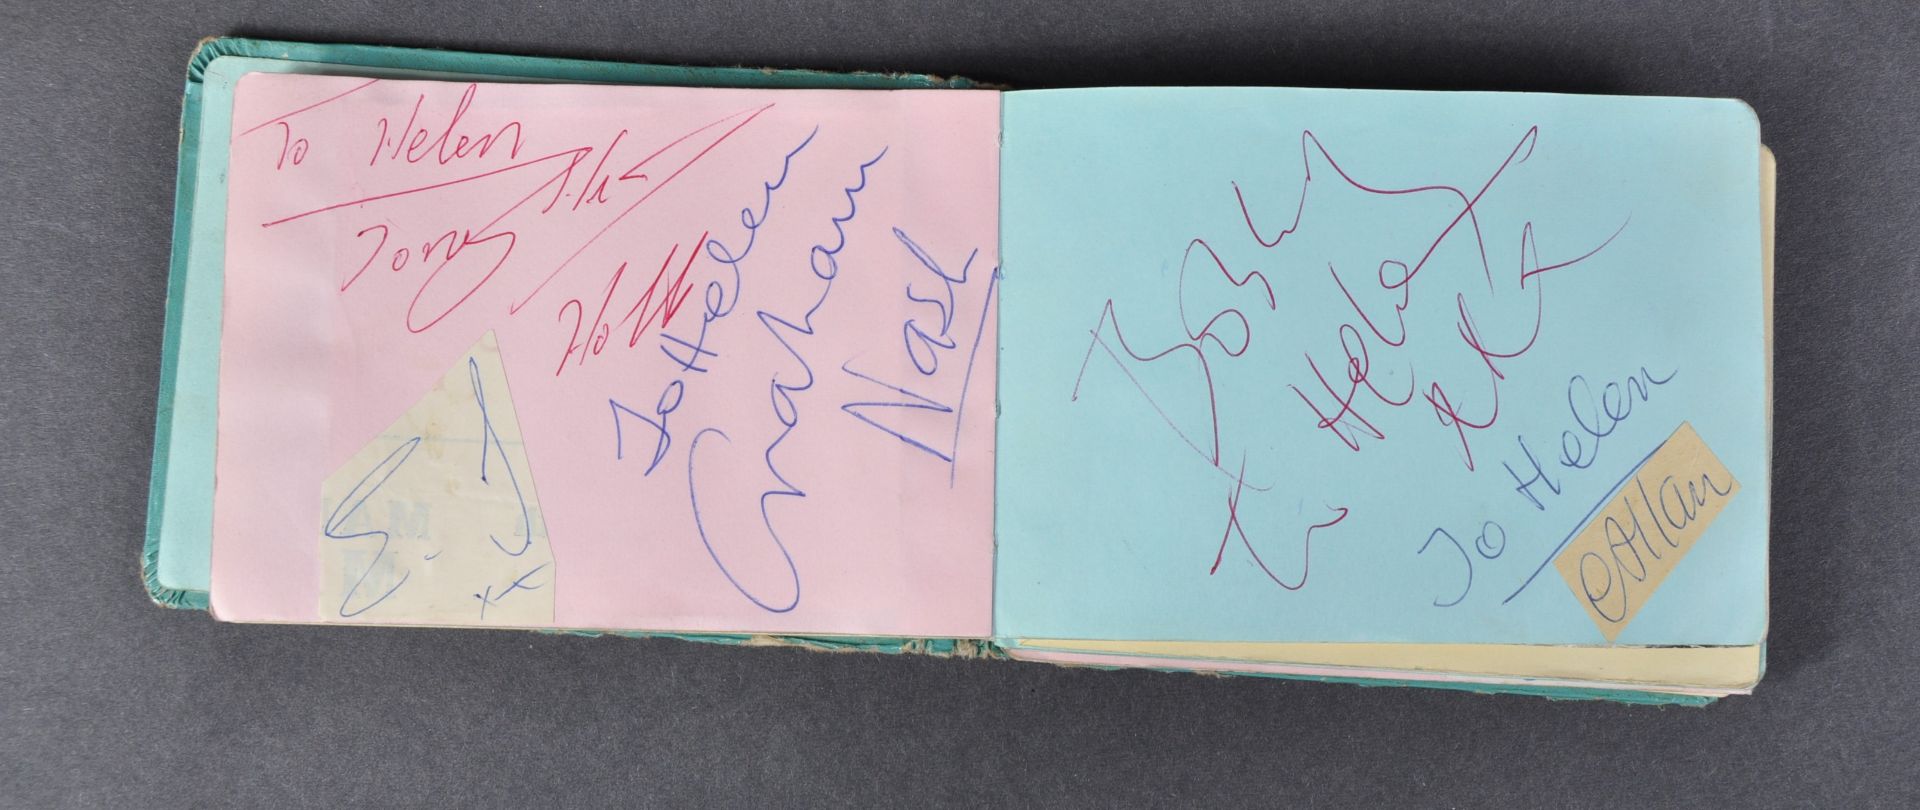 1960S MUSIC AUTOGRAPH ALBUMS - OBTAINED FROM DISCS-A-GOGO - Image 9 of 31